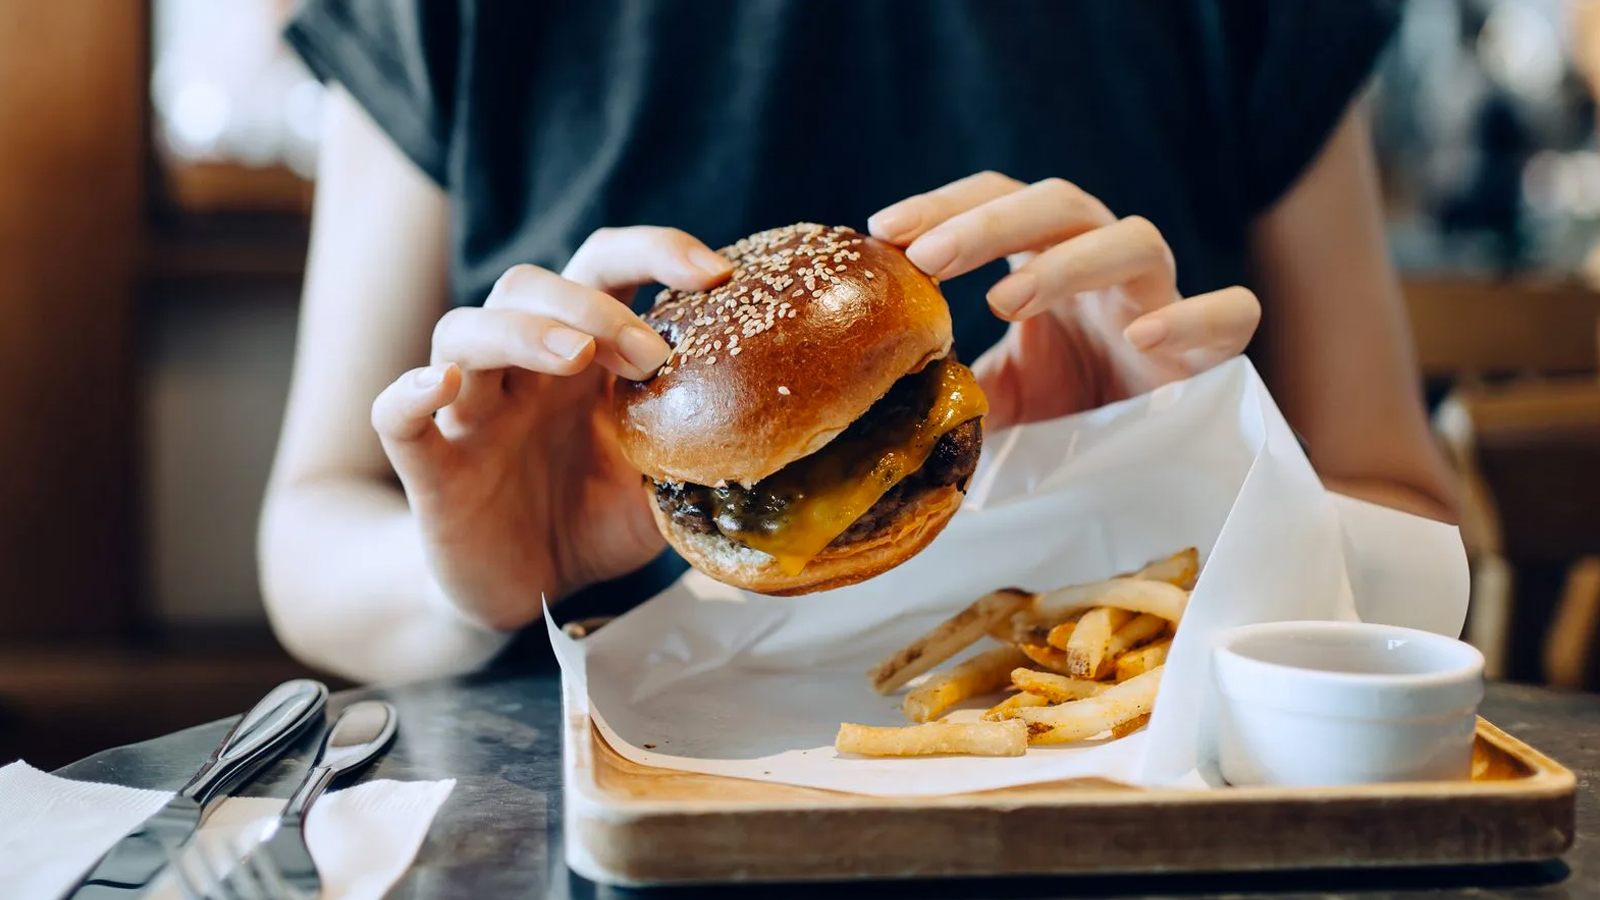 Age-Old Debate Settled: This Is The Correct Way To Eat A Burger